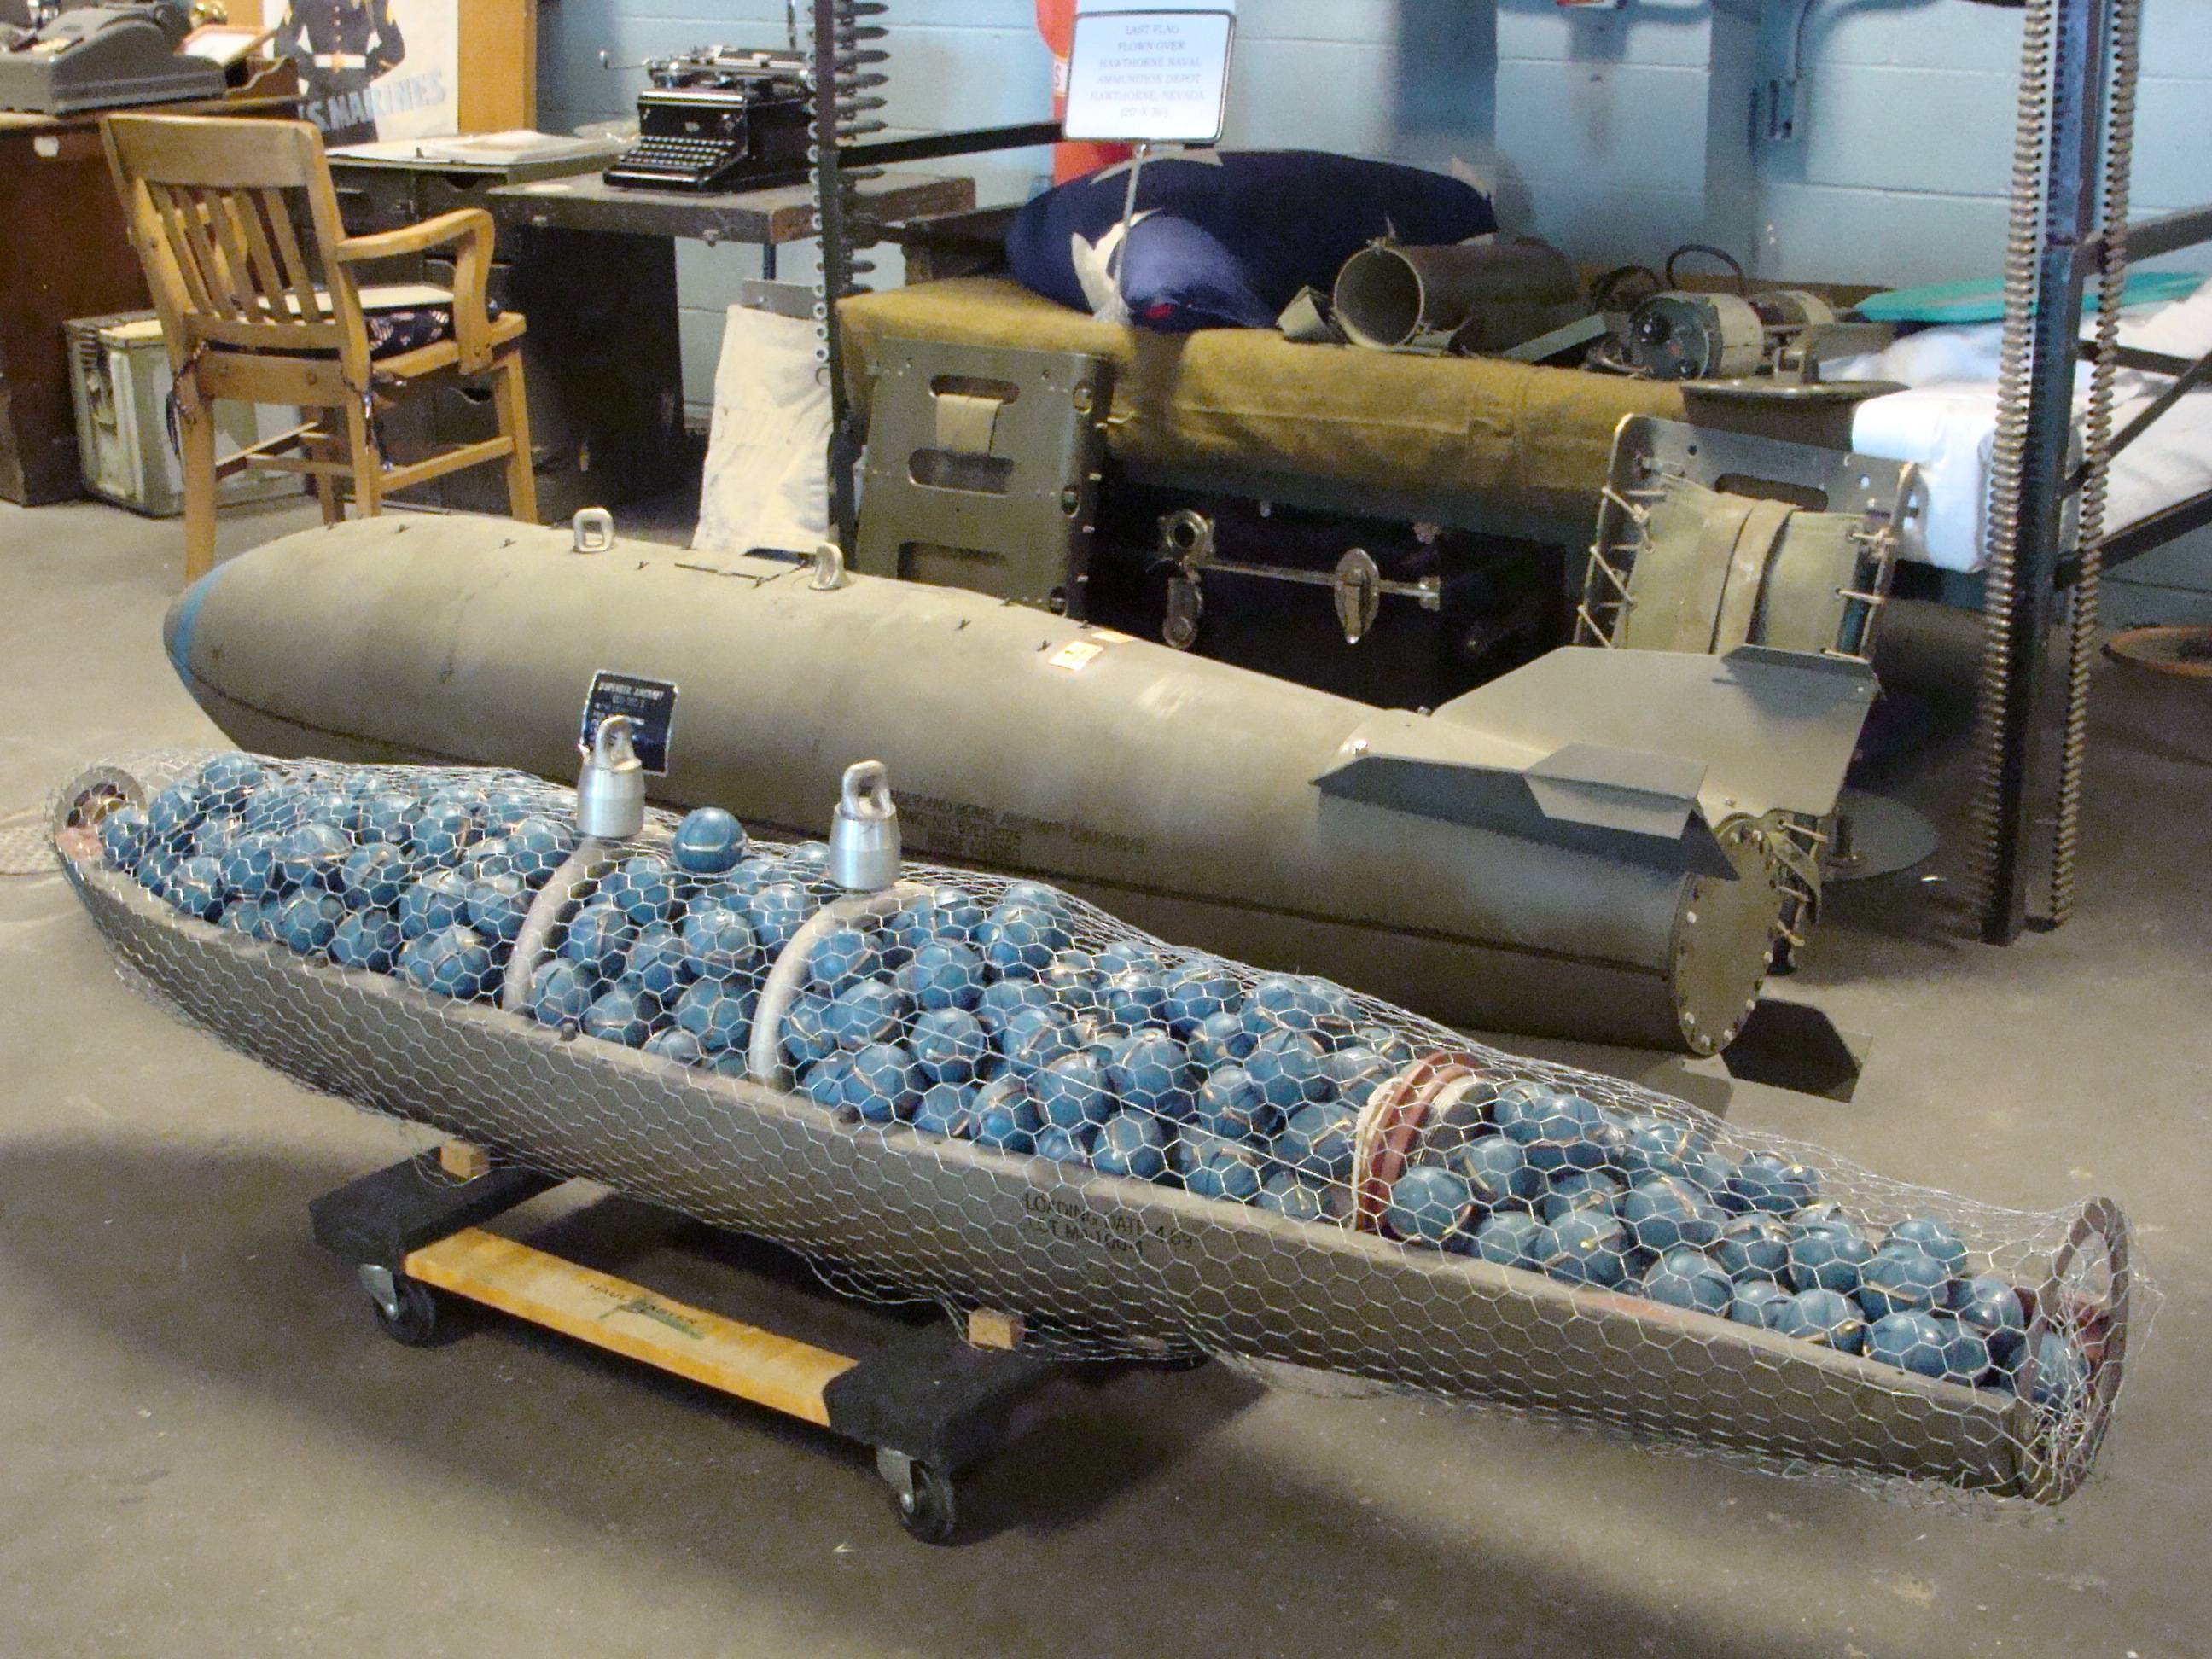 The inside of a cluster bomb